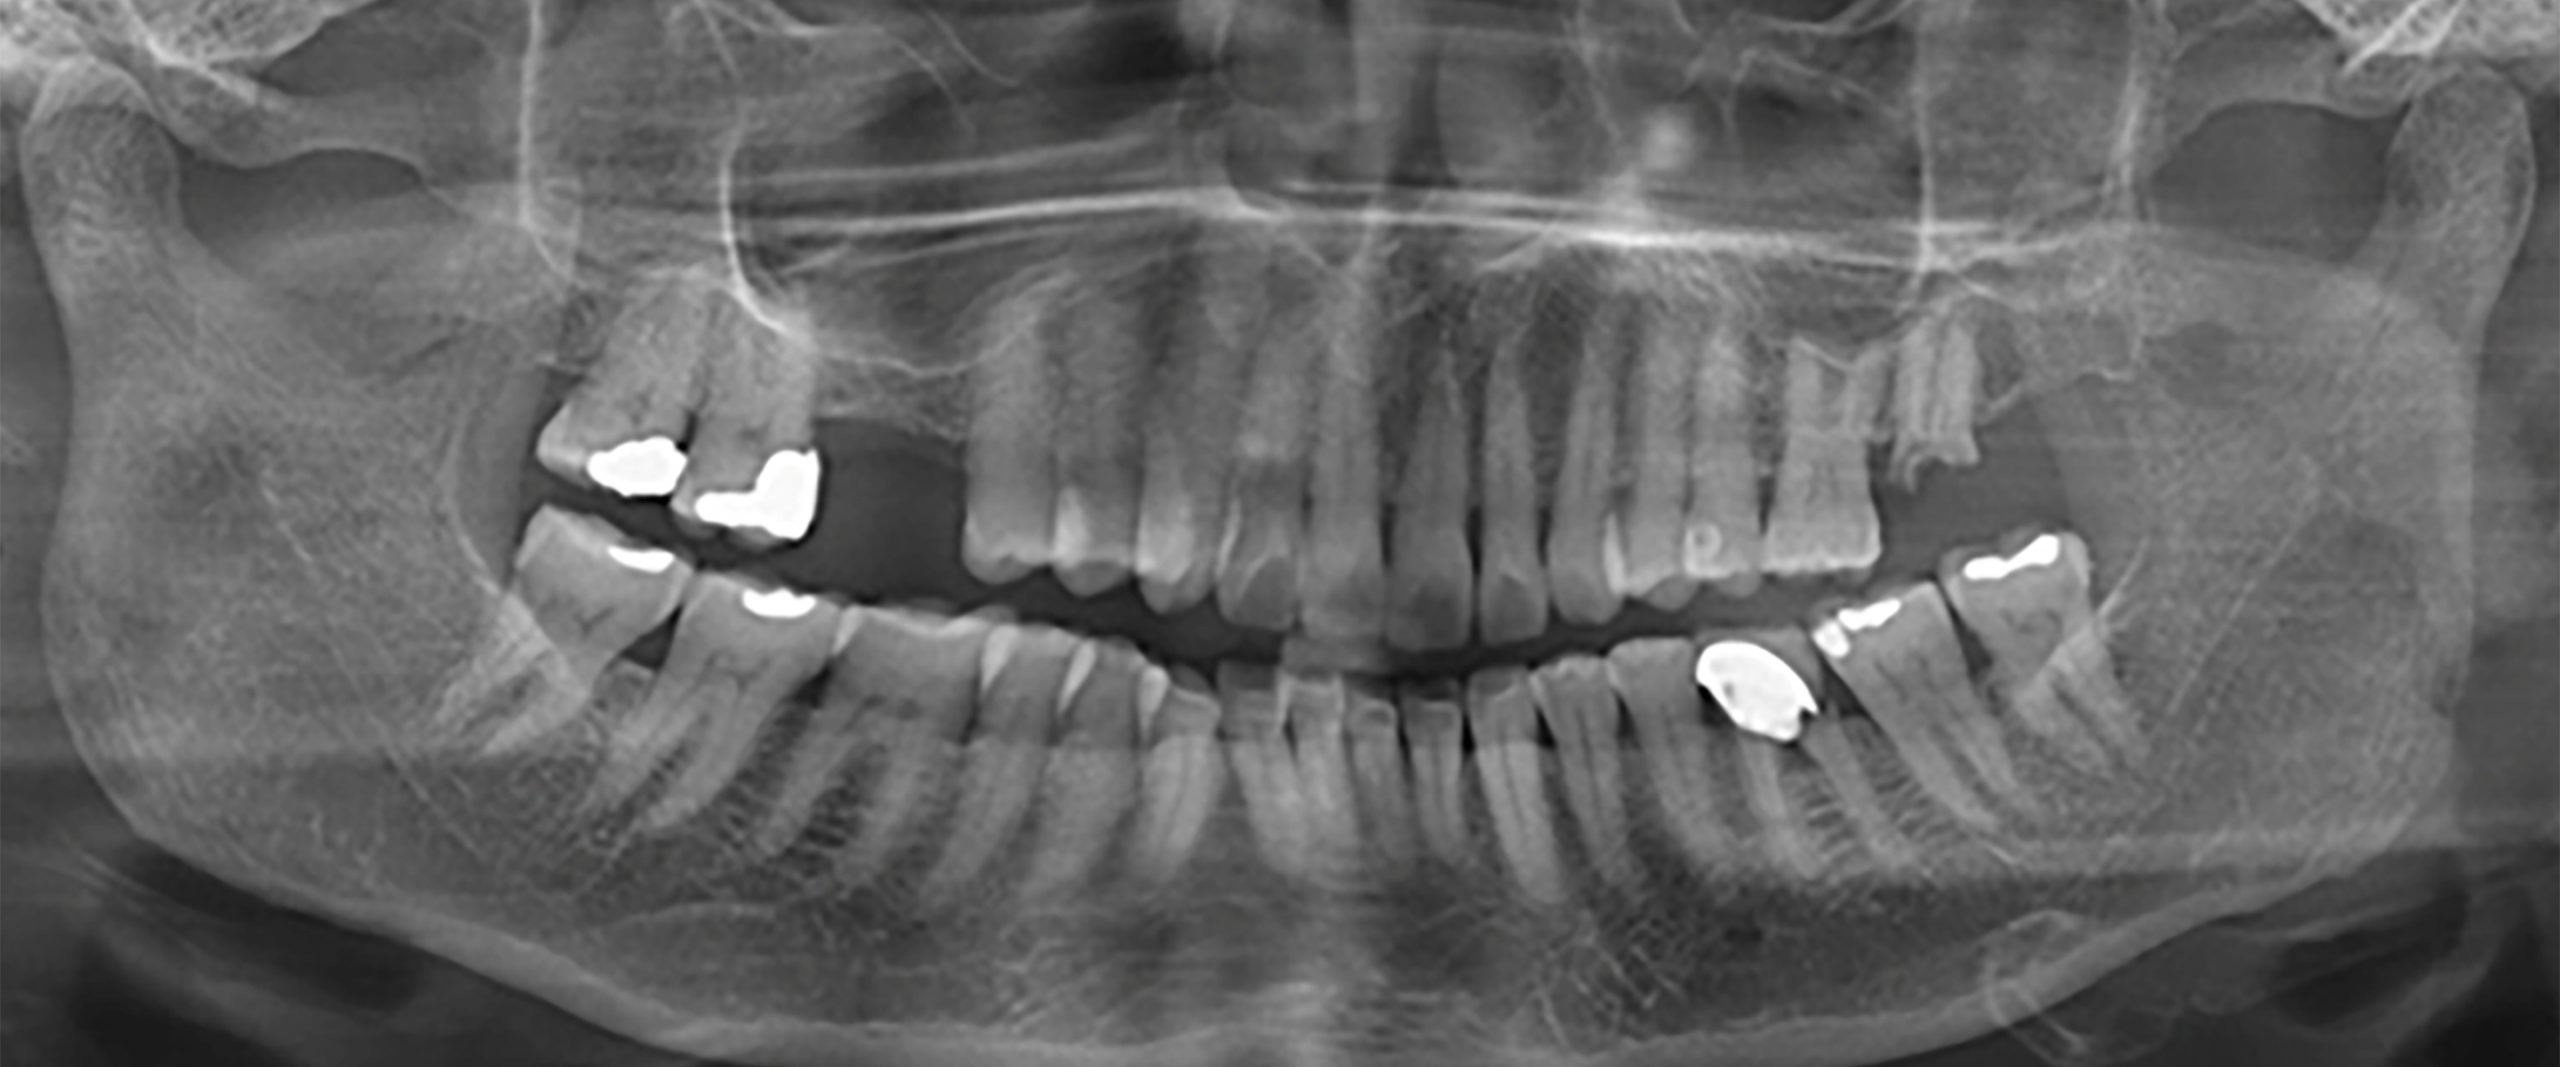 Fig. 1: A 63-year-old woman presented with a hopeless lower left first molar